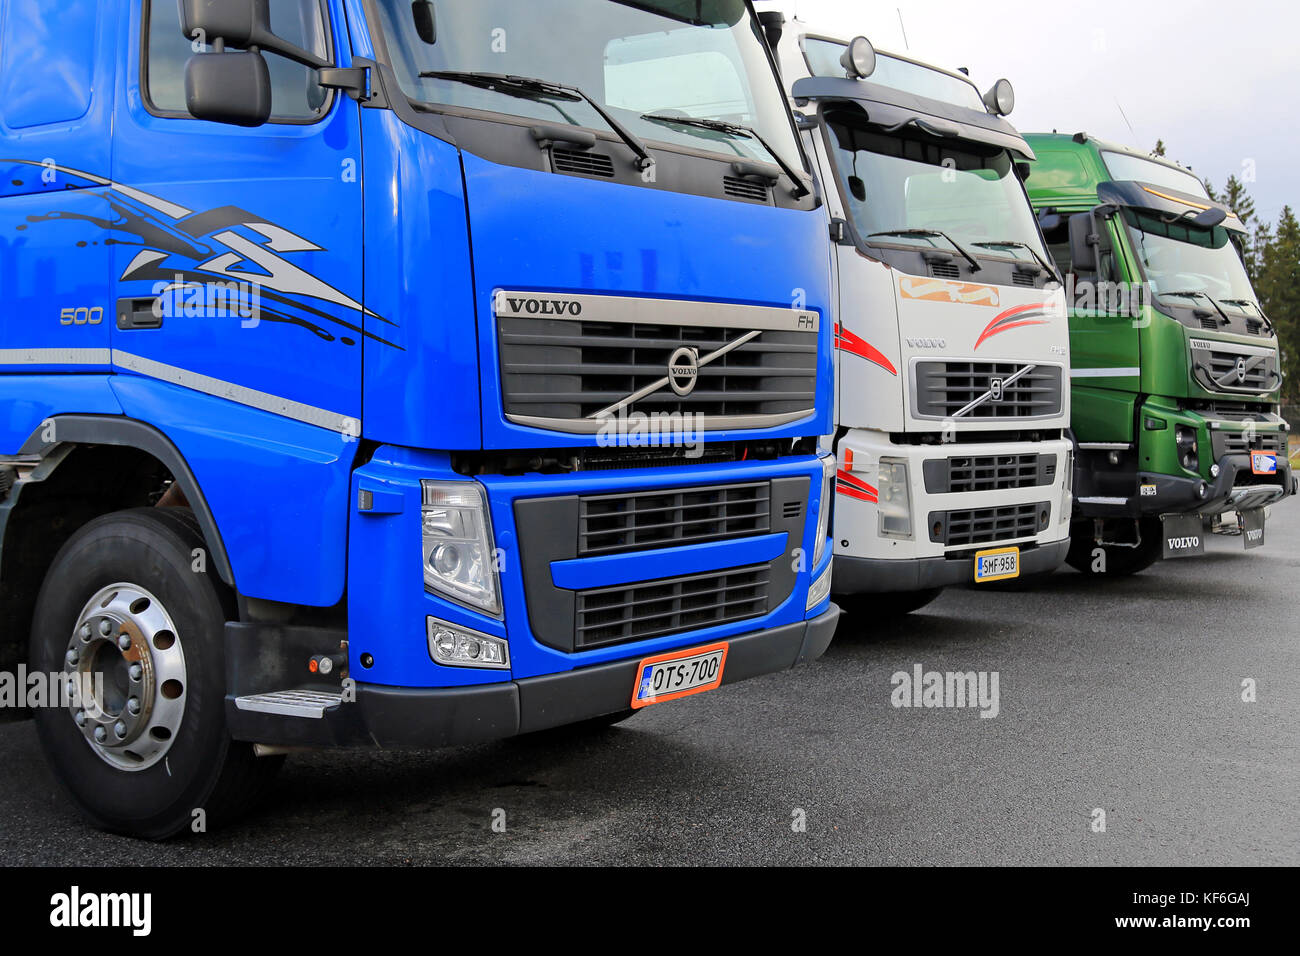 LIETO, FINLAND - NOVEMBER 14, 2015: Lineup of three used Volvo trucks as seen on the Volvo Truck Center Turku Demo Drive and Tire Service Event. Stock Photo